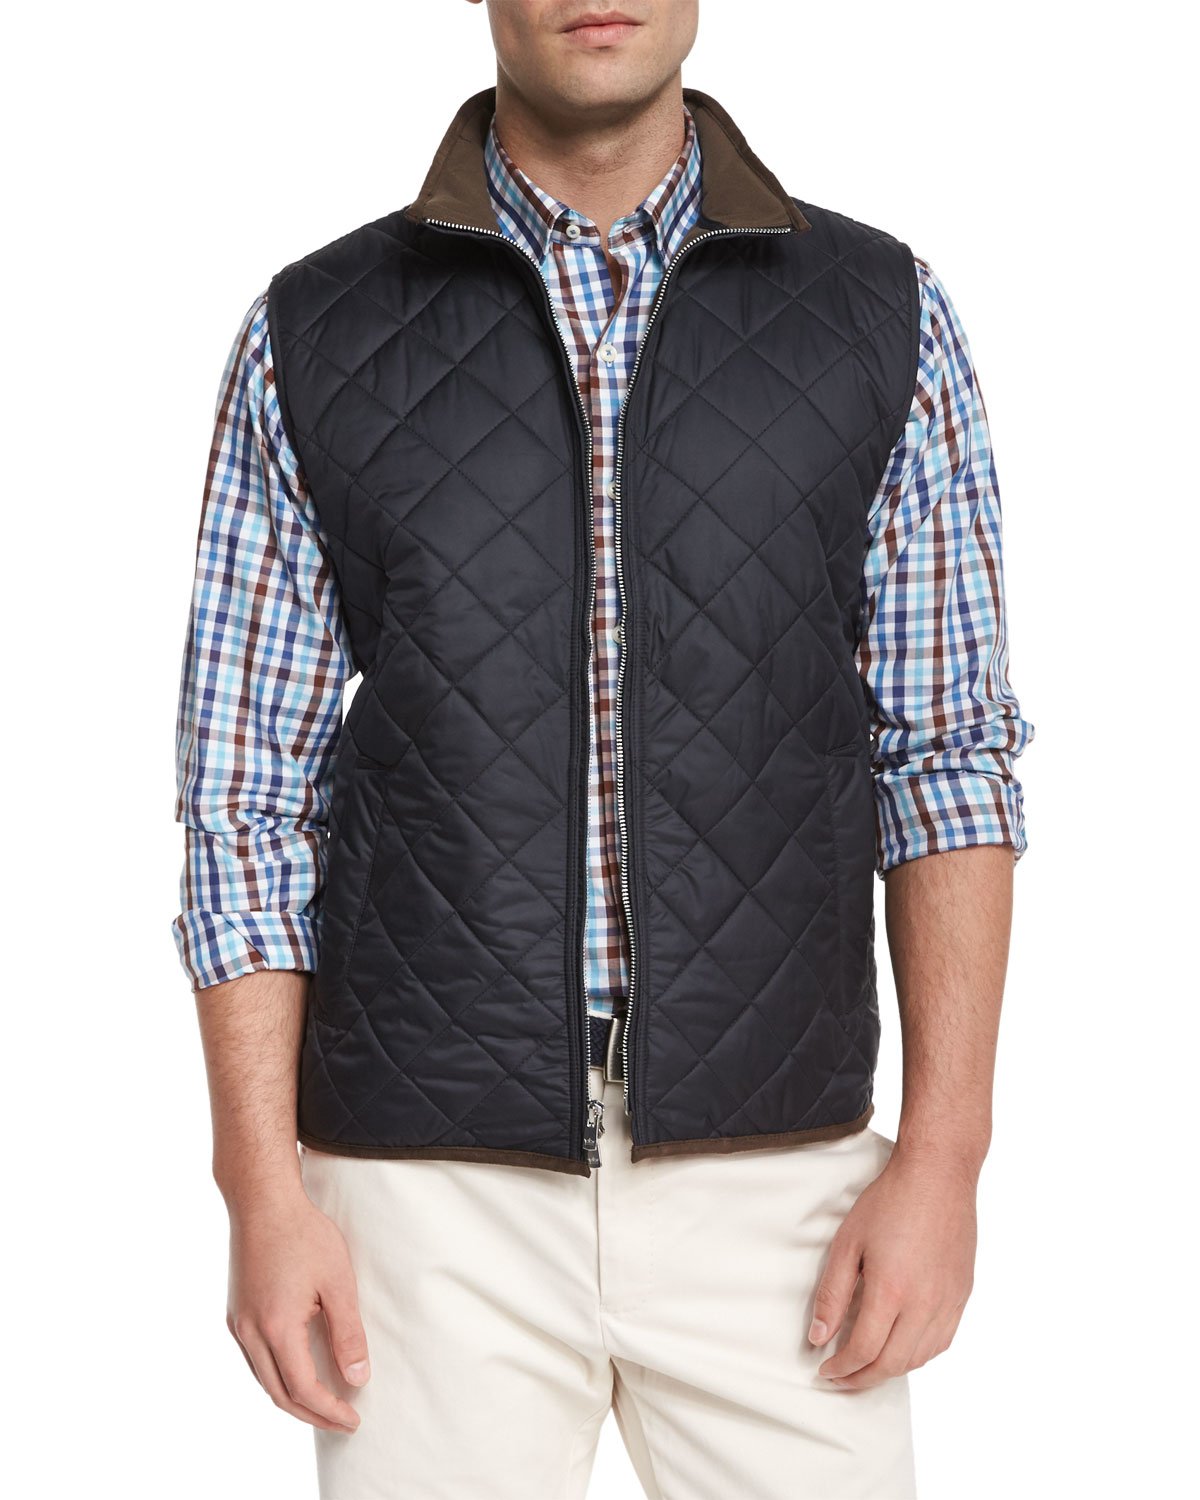 Peter Millar Synthetic Potomac Quilted Vest in Black for Men - Lyst